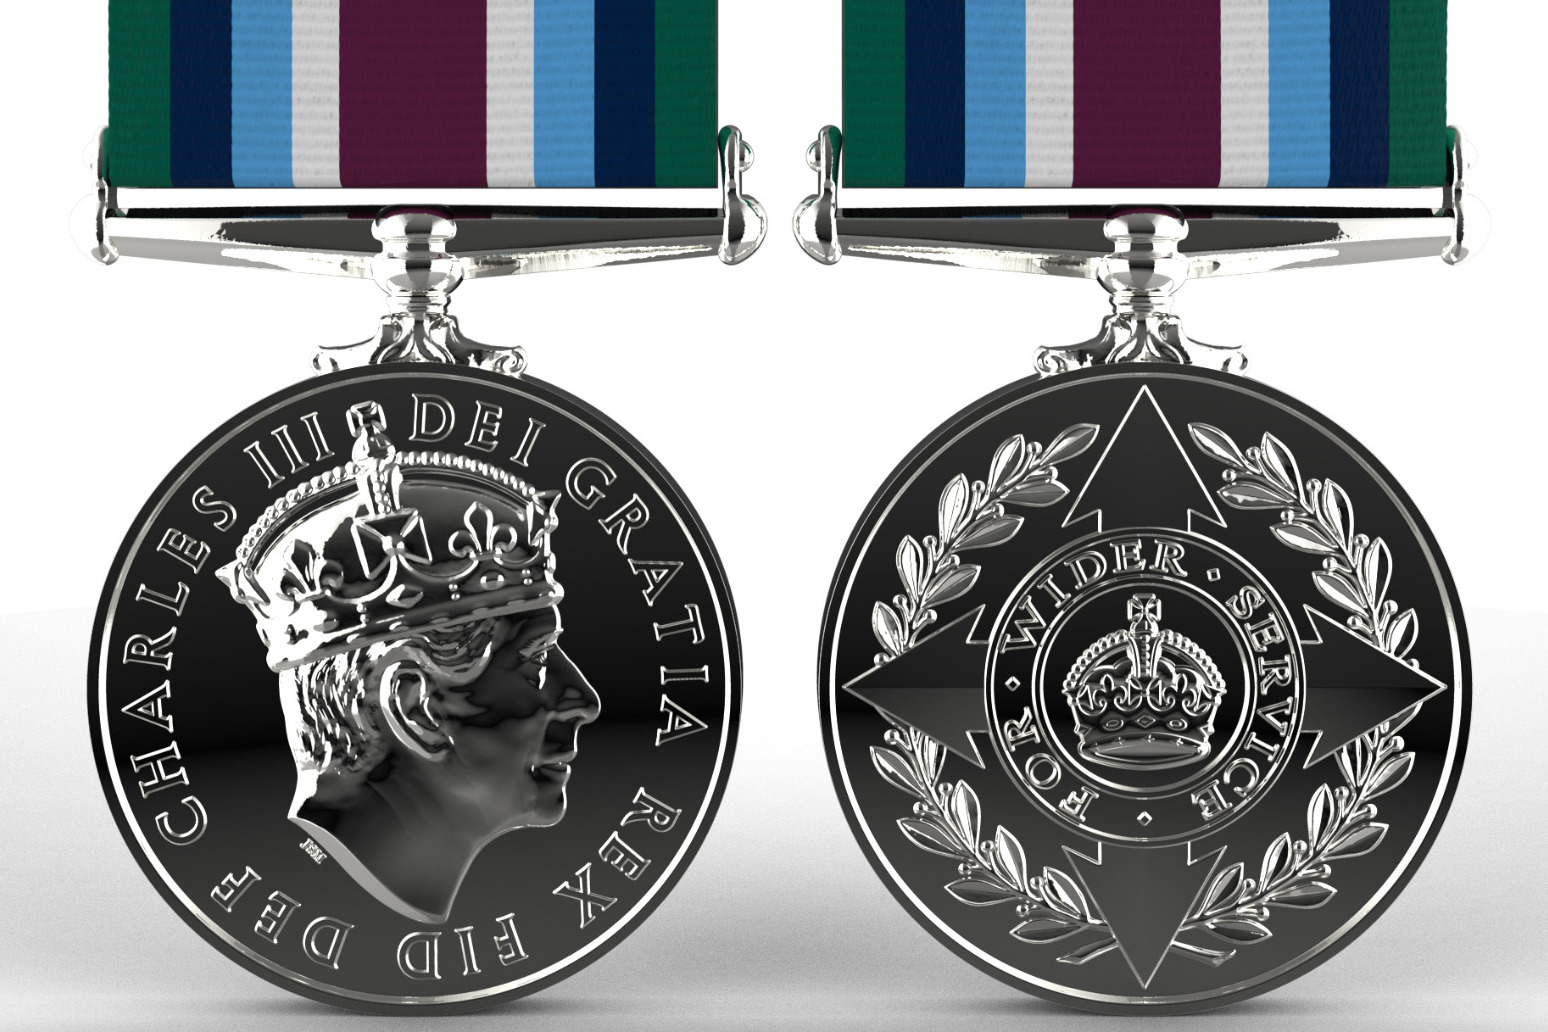 New military medal announced by Ministry of Defence